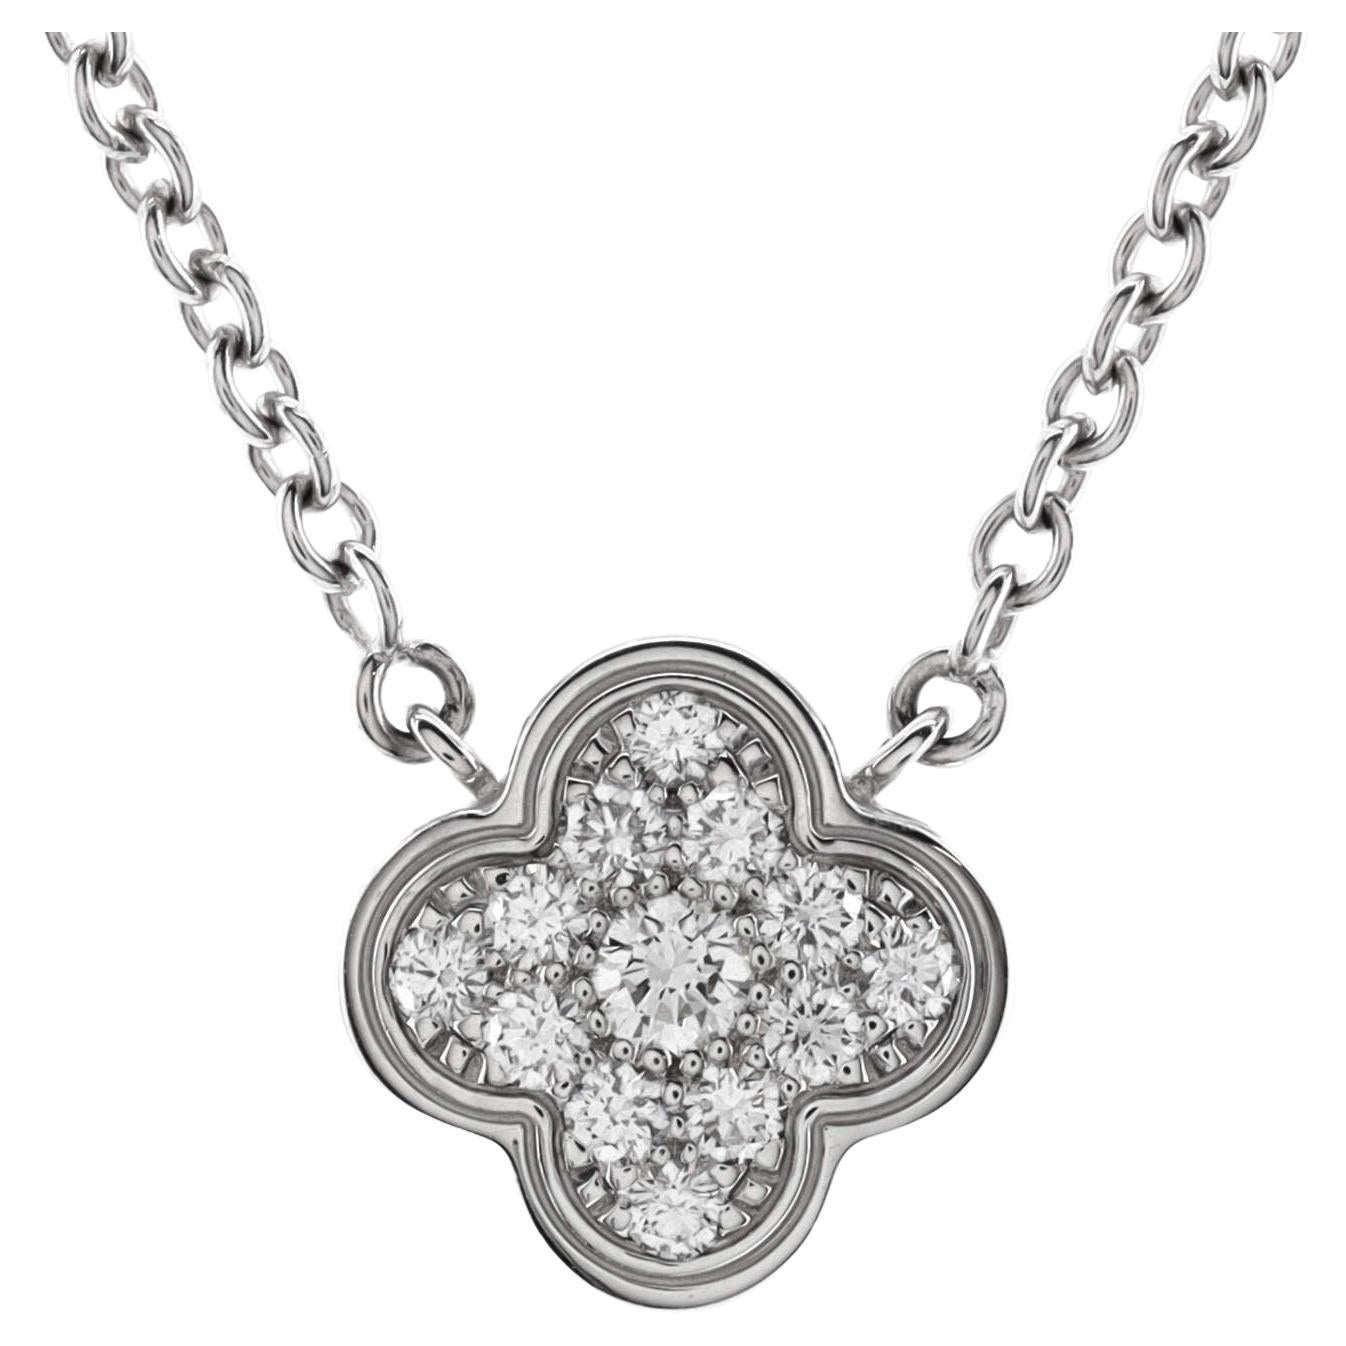 Van Cleef & Arpels Pure Alhambra Pendant Necklace 18K White Gold with Diamonds